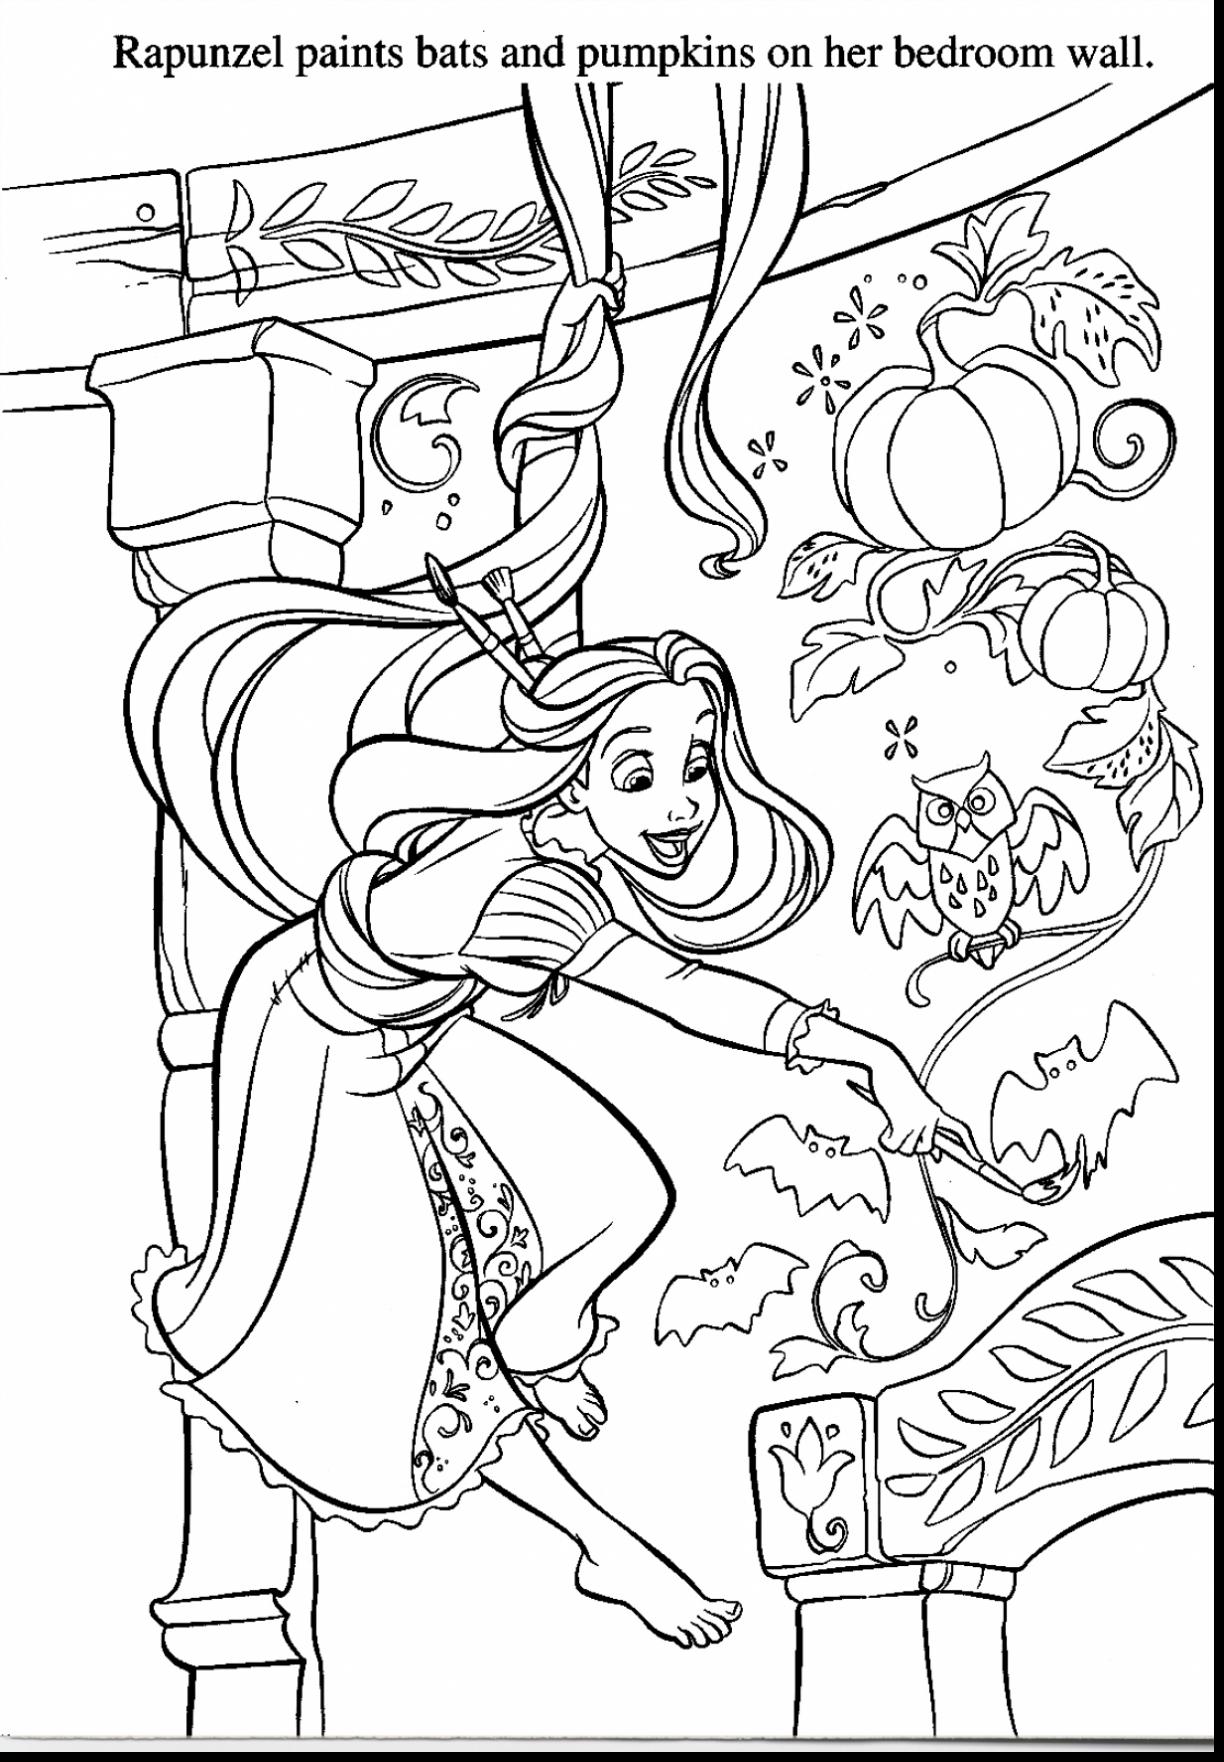 Frozen Halloween Coloring Pages at GetColorings.com   Free printable ...